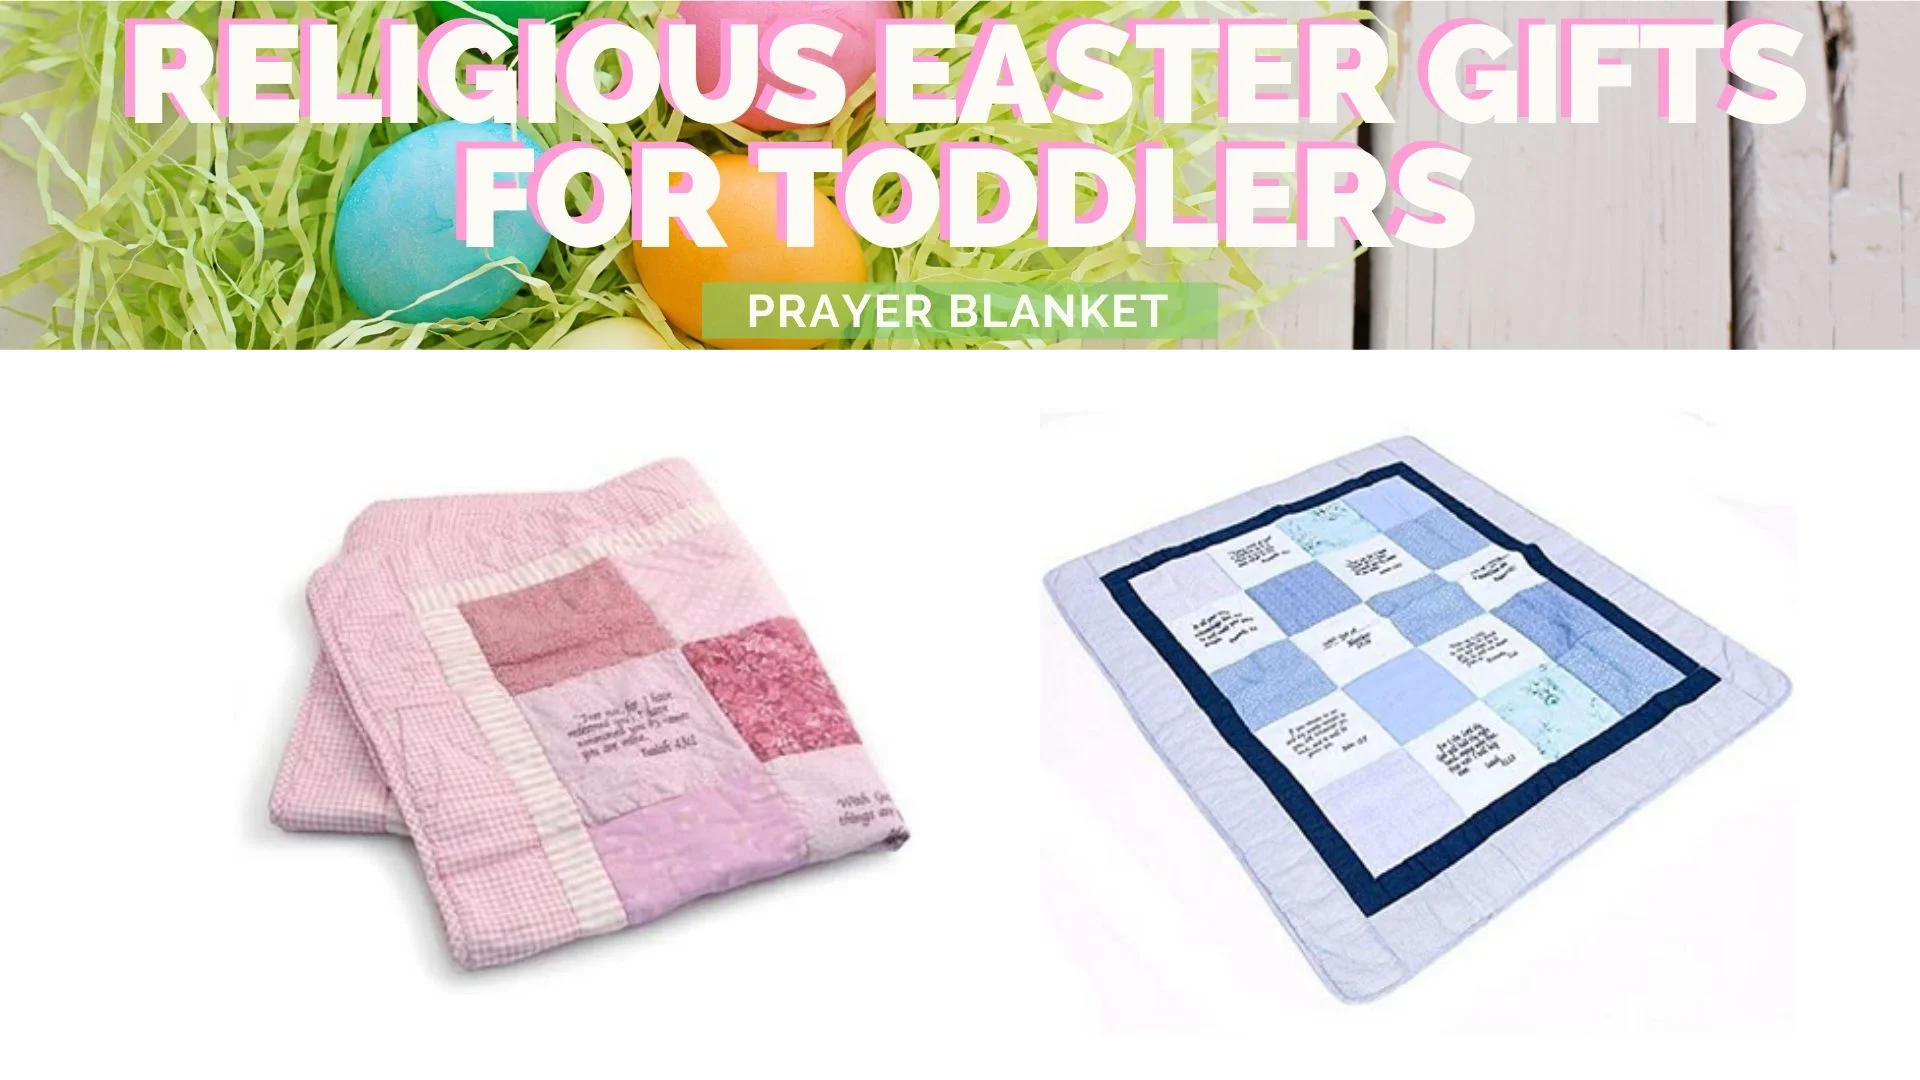 prayer blankets make special easter gifts for toddlers